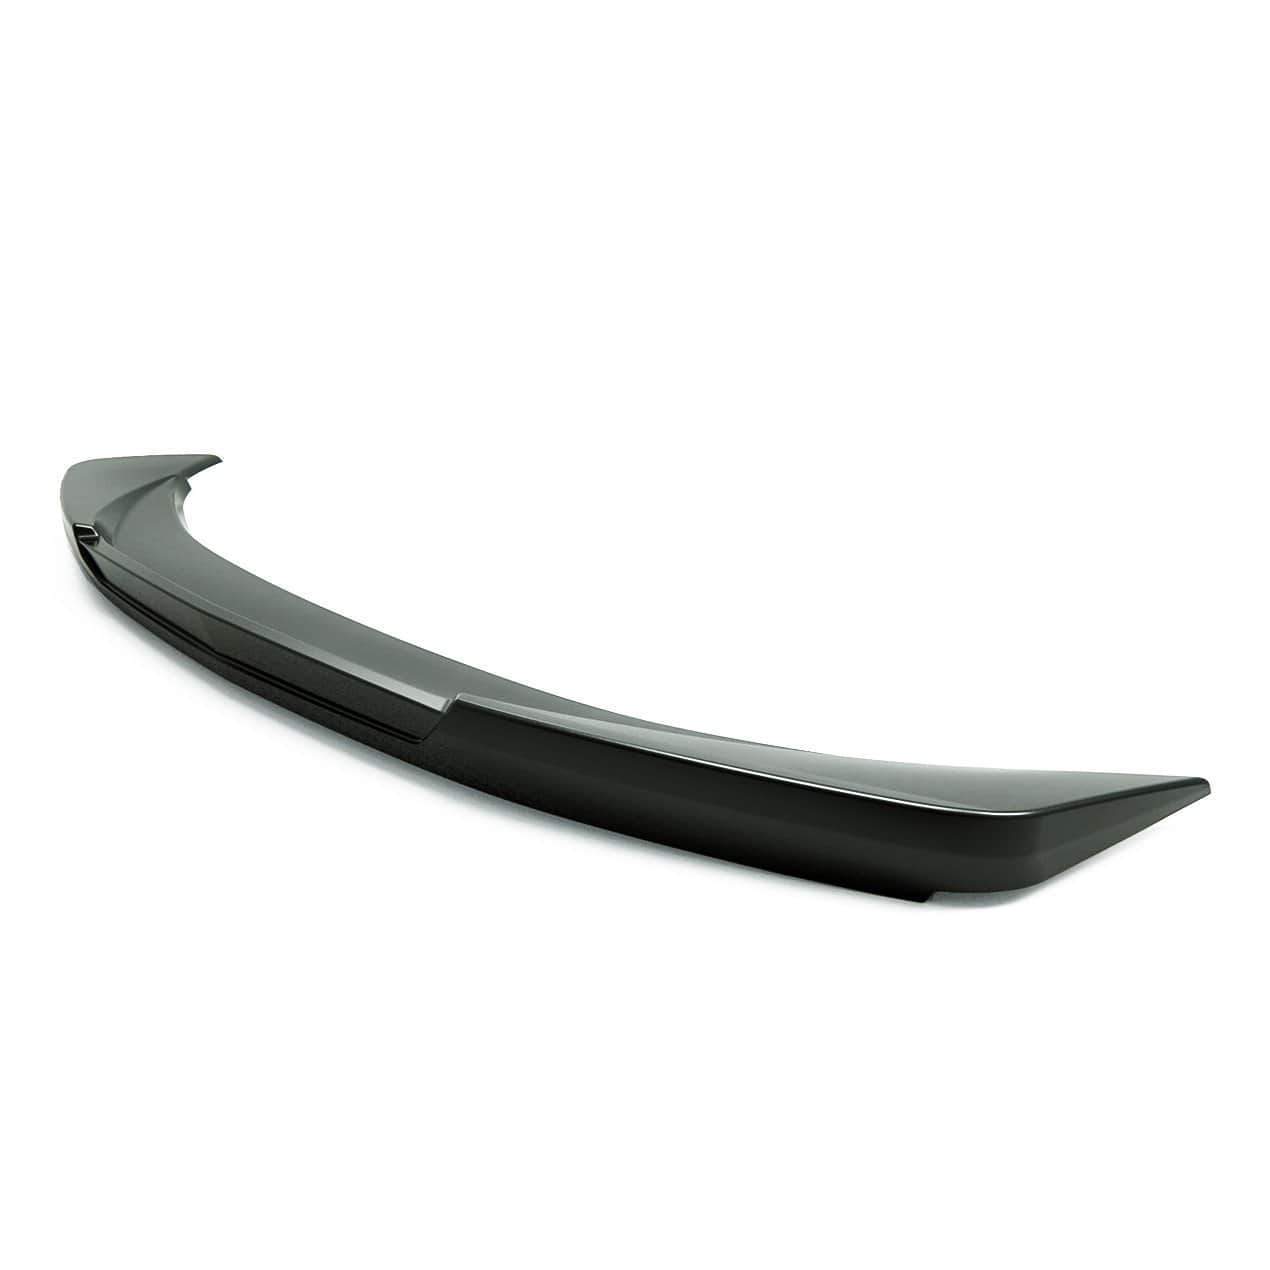 ACS Gen6 Camaro Rear Deck Spoiler [48-4-015]PRM for 2019-20 Camaro LS LT, in Gloss Black finish. Improves downforce and vehicle control. Easy bolt-on installation.